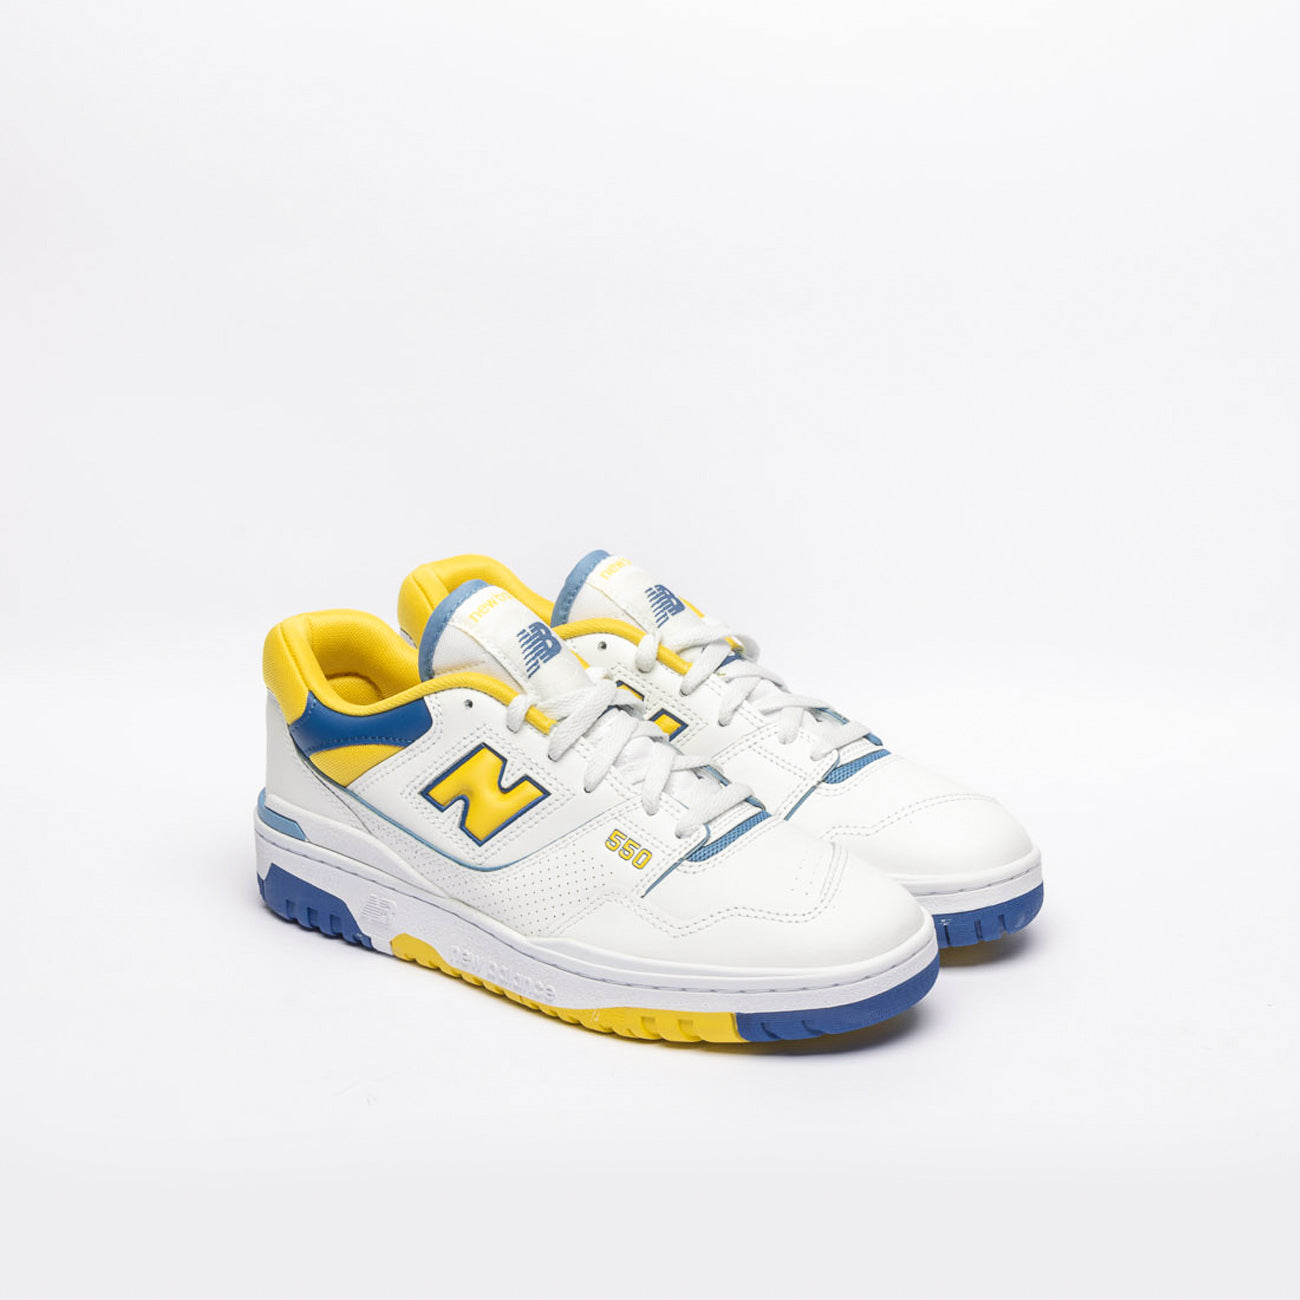 New Balance 550 low basketball sneaker in white leather with yellow accent